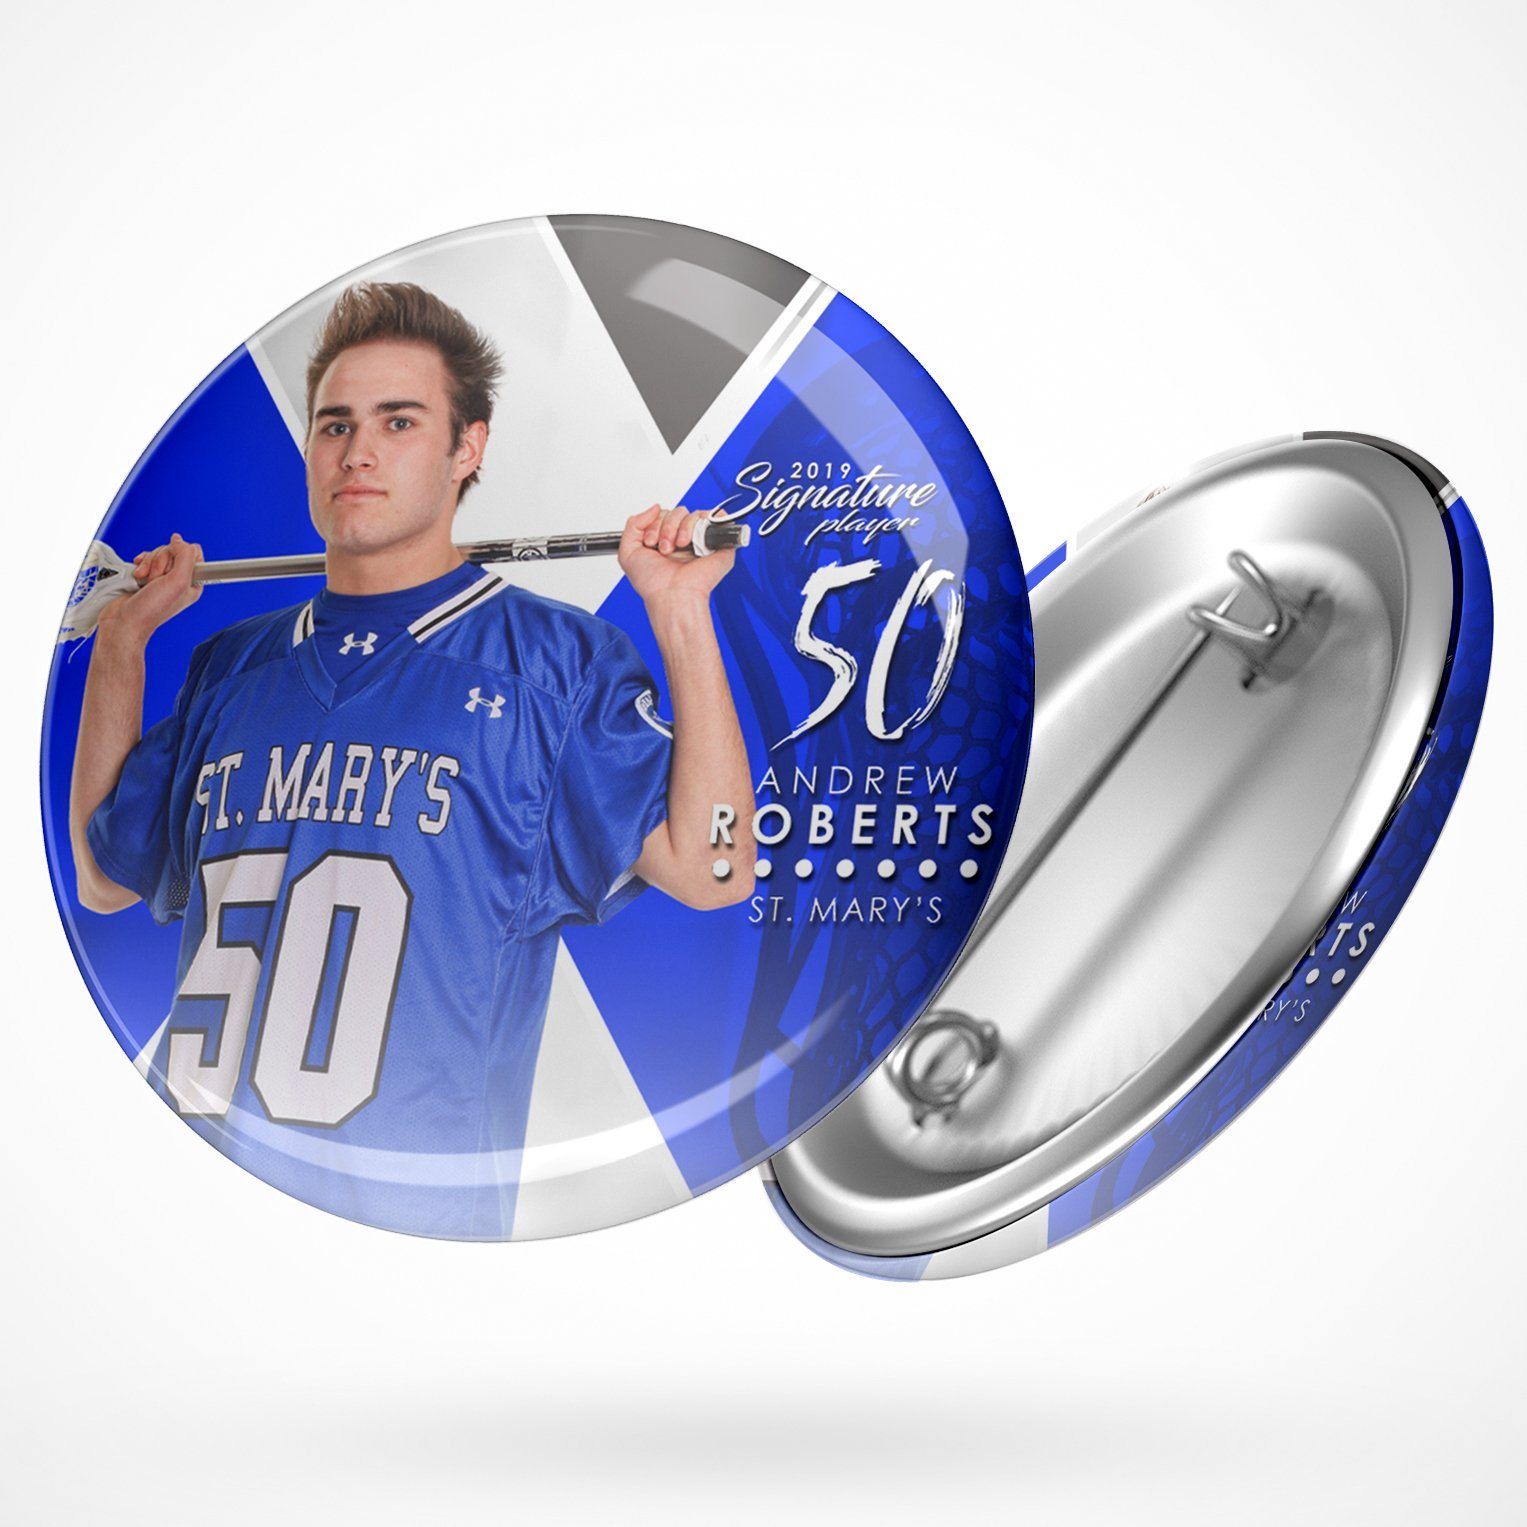 Signature Player - Lacrosse - V2 - Extraction Button Template-Photoshop Template - Photo Solutions